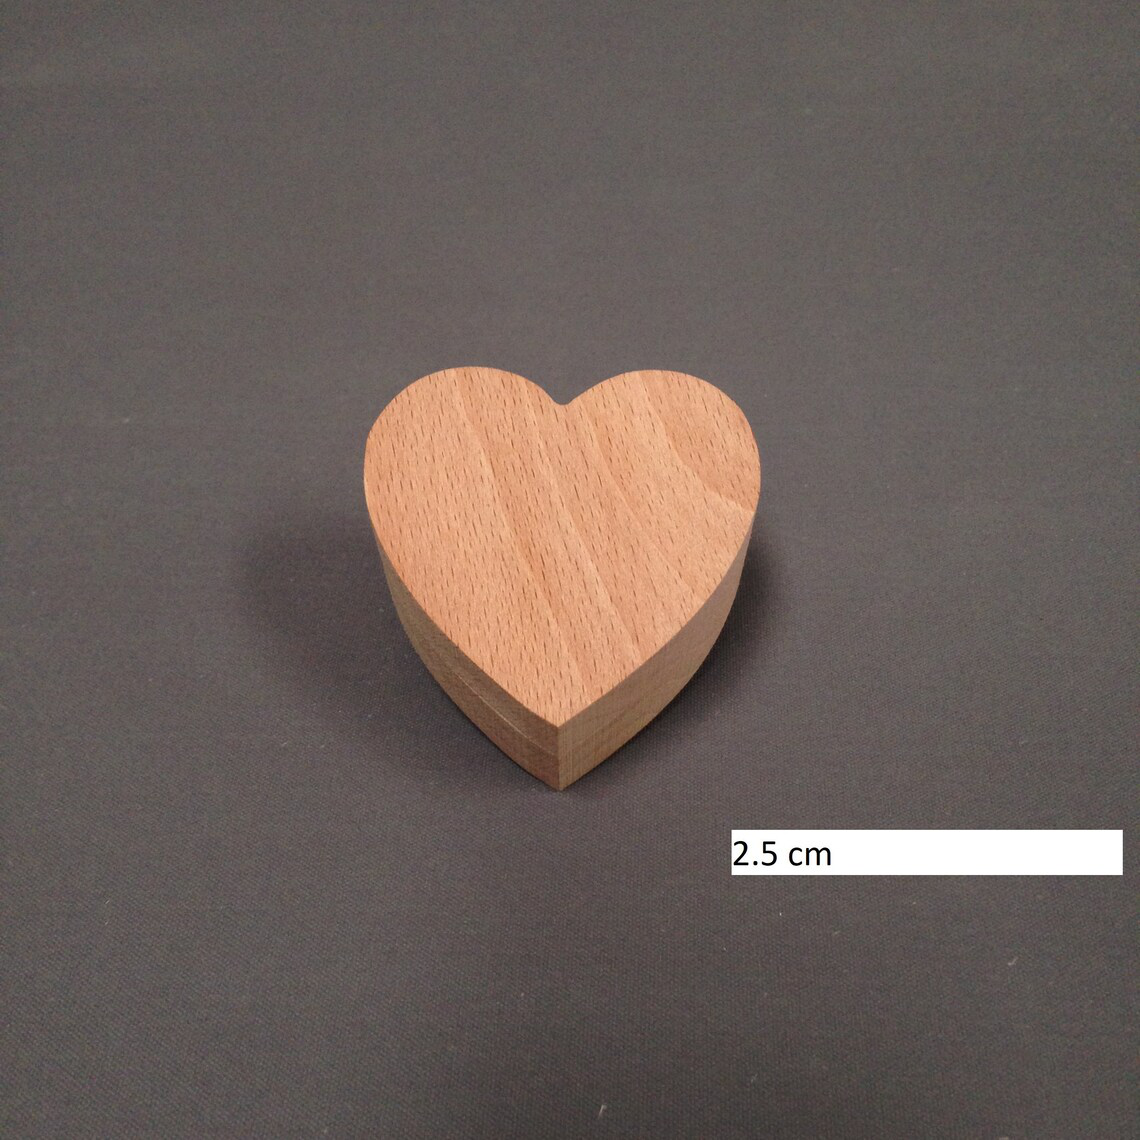 Heart Shaped Wooden Ring Box - 2.5cm